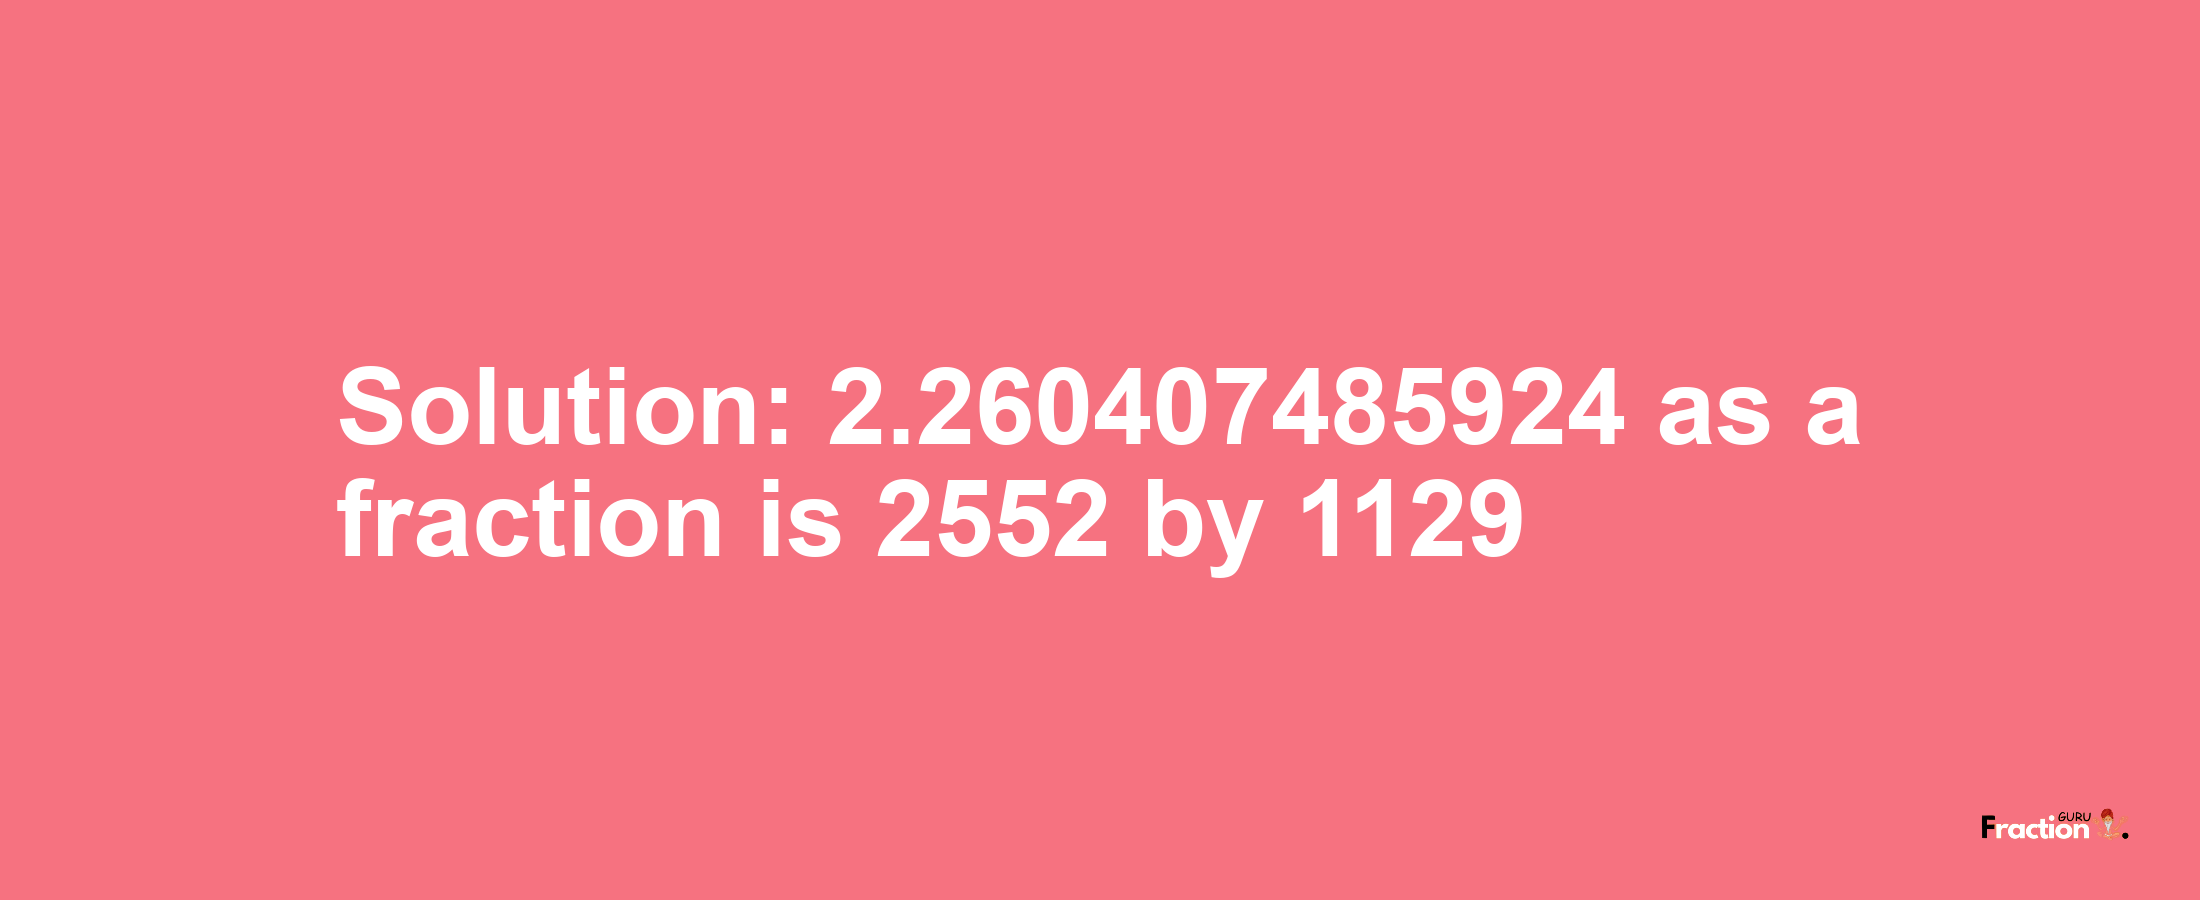 Solution:2.260407485924 as a fraction is 2552/1129